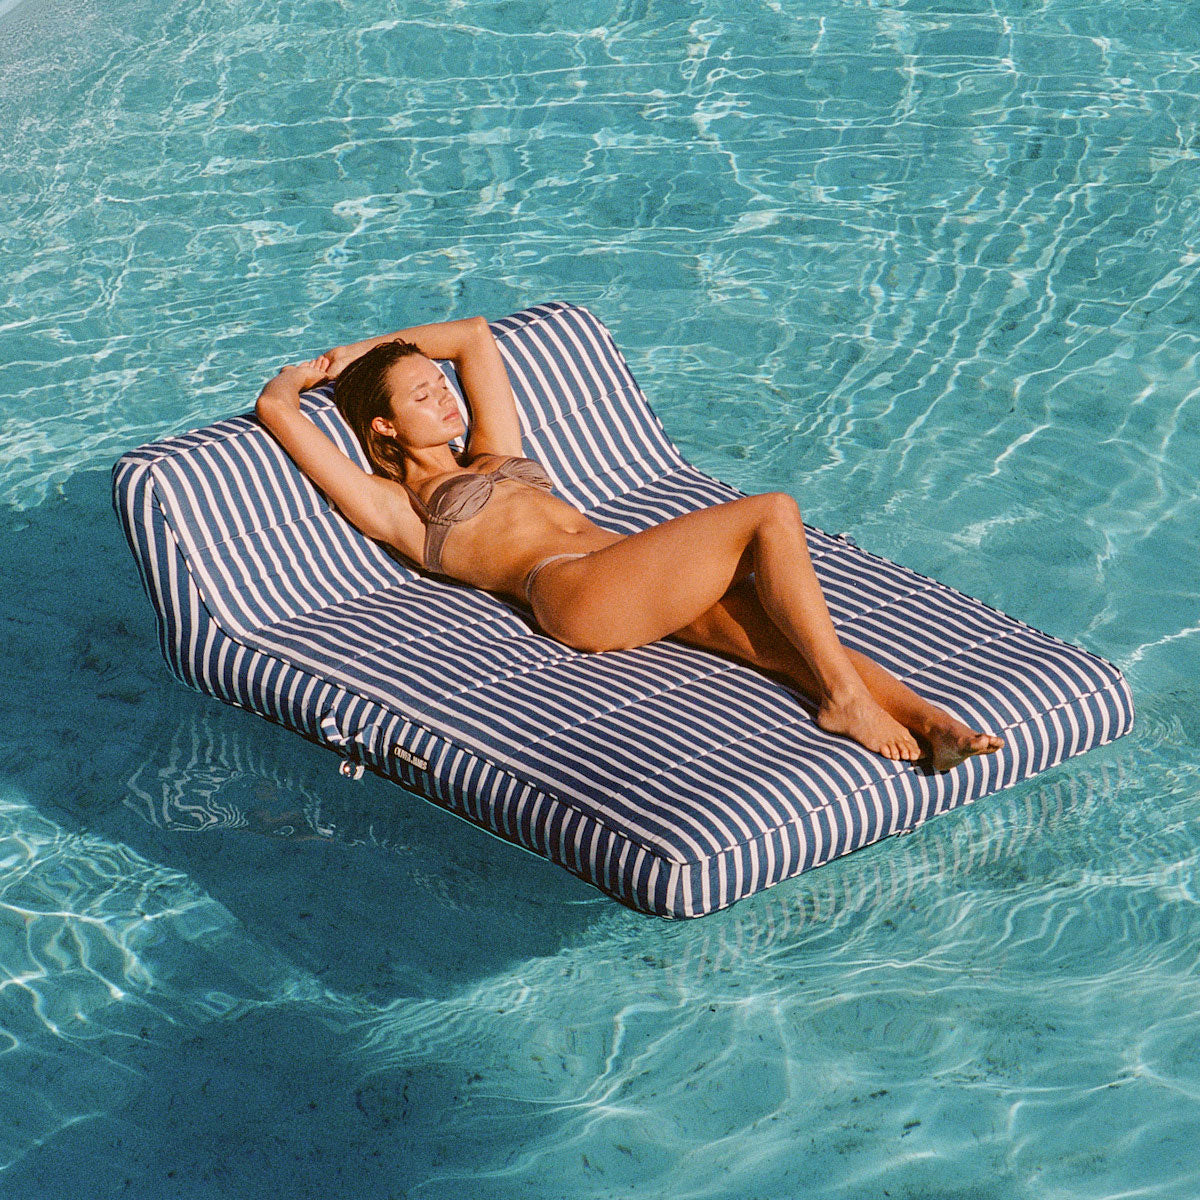 A women relaxing on a double white and blue striped pool float for adults in the middle of a swimming pool.